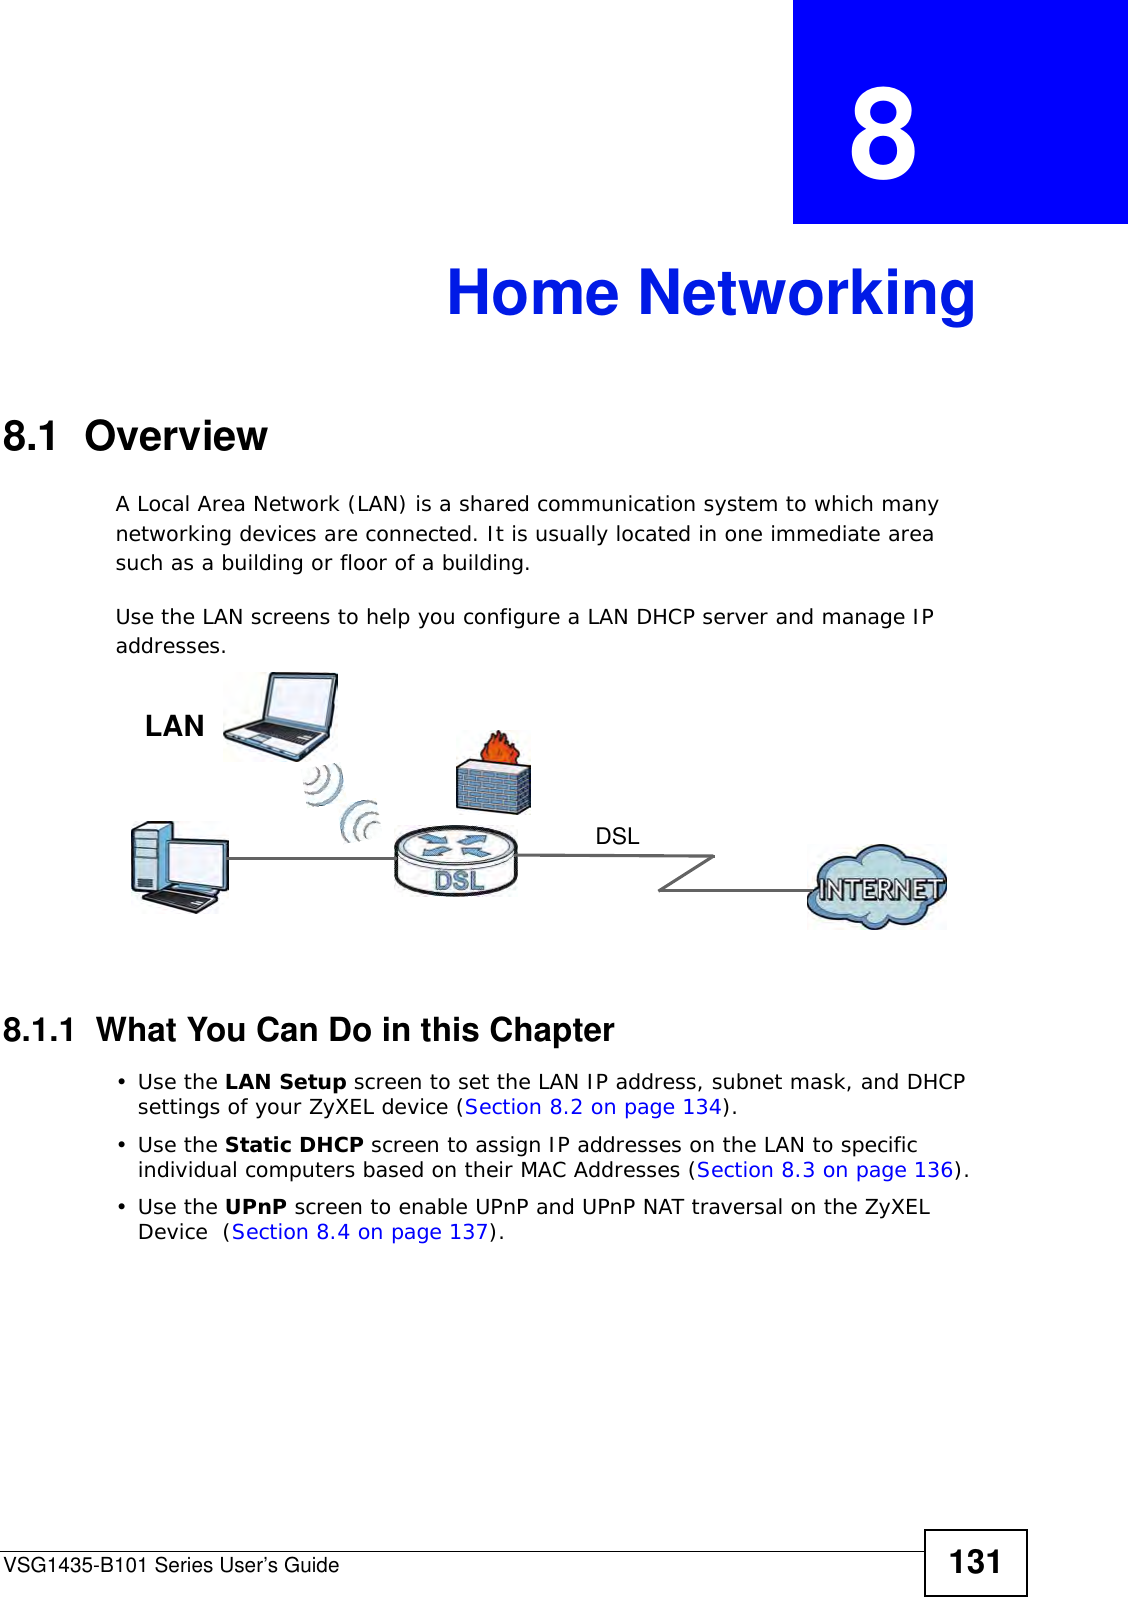 VSG1435-B101 Series User’s Guide 131CHAPTER  8 Home Networking8.1  OverviewA Local Area Network (LAN) is a shared communication system to which many networking devices are connected. It is usually located in one immediate area such as a building or floor of a building.Use the LAN screens to help you configure a LAN DHCP server and manage IP addresses.8.1.1  What You Can Do in this Chapter•Use the LAN Setup screen to set the LAN IP address, subnet mask, and DHCP settings of your ZyXEL device (Section 8.2 on page 134).•Use the Static DHCP screen to assign IP addresses on the LAN to specific individual computers based on their MAC Addresses (Section 8.3 on page 136). •Use the UPnP screen to enable UPnP and UPnP NAT traversal on the ZyXEL Device  (Section 8.4 on page 137).DSLLAN